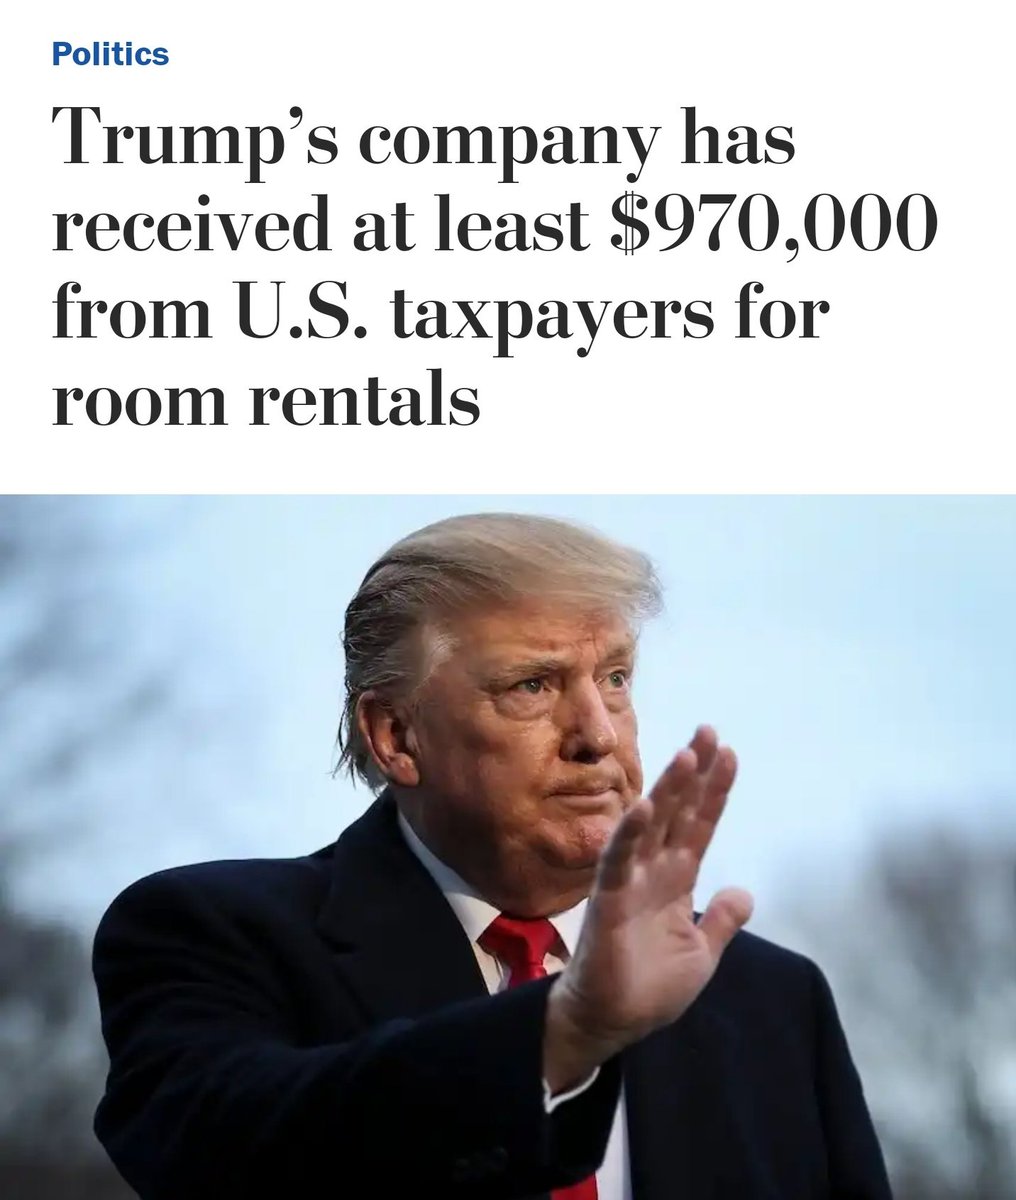 - Looted taxpayer money for personal profit  https://www.washingtonpost.com/politics/trumps-company-has-received-at-least-970000-from-us-taxpayers-for-room-rentals/2020/05/14/26d27862-916d-11ea-9e23-6914ee410a5f_story.html